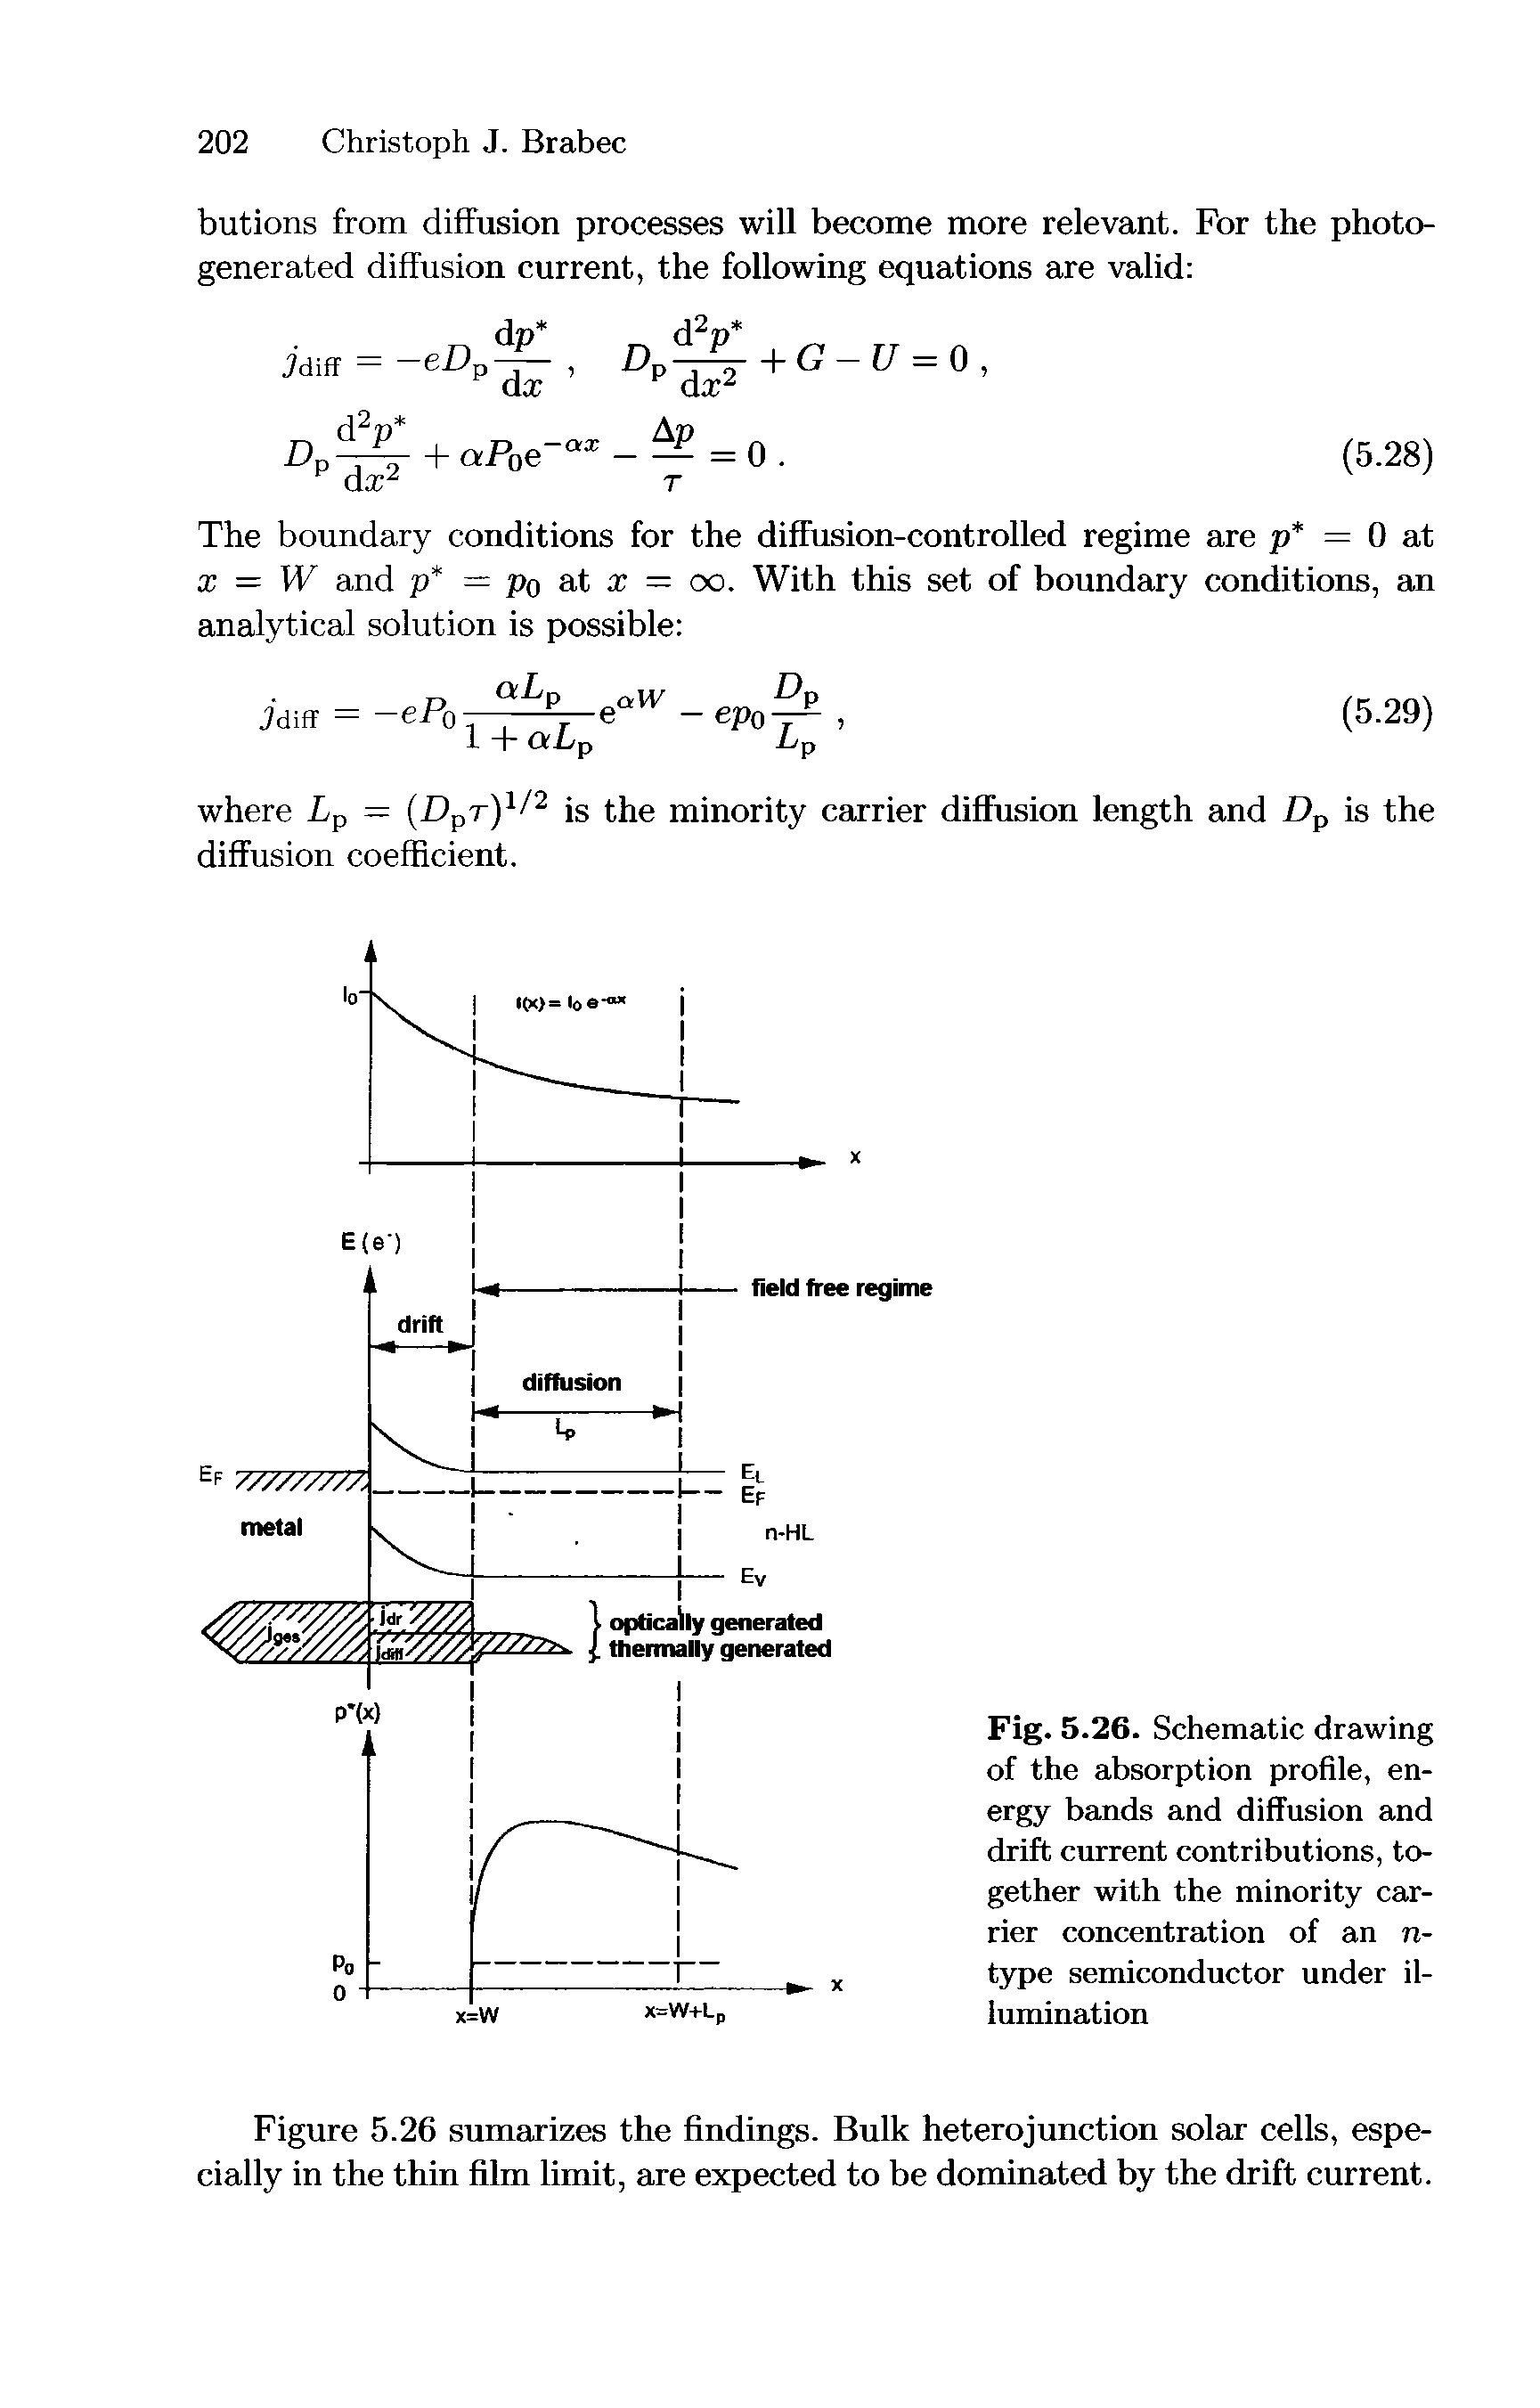 Fig. 5.26. Schematic drawing of the absorption profile, energy bands and diffusion and drift current contributions, together with the minority carrier concentration of an n-type semiconductor under illumination...